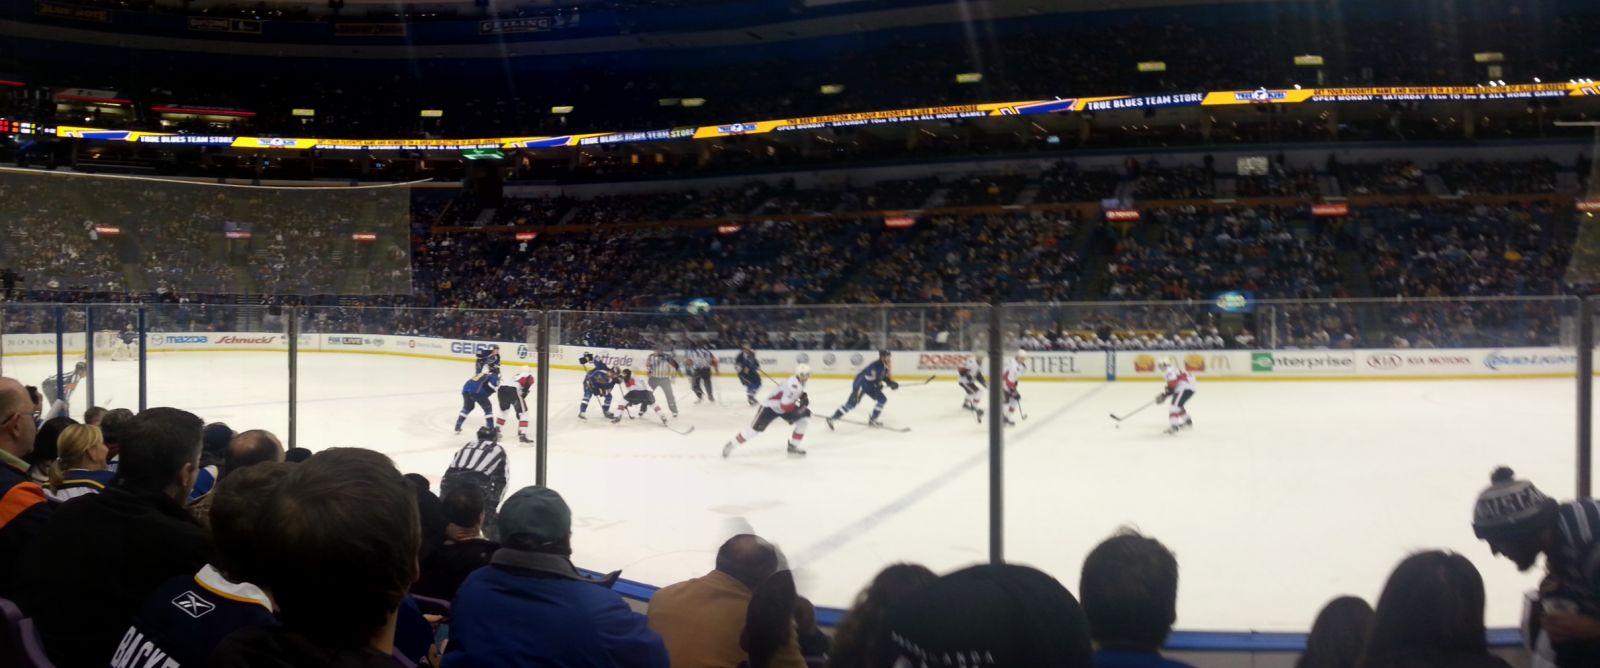 St Louis Blues Seating Chart View